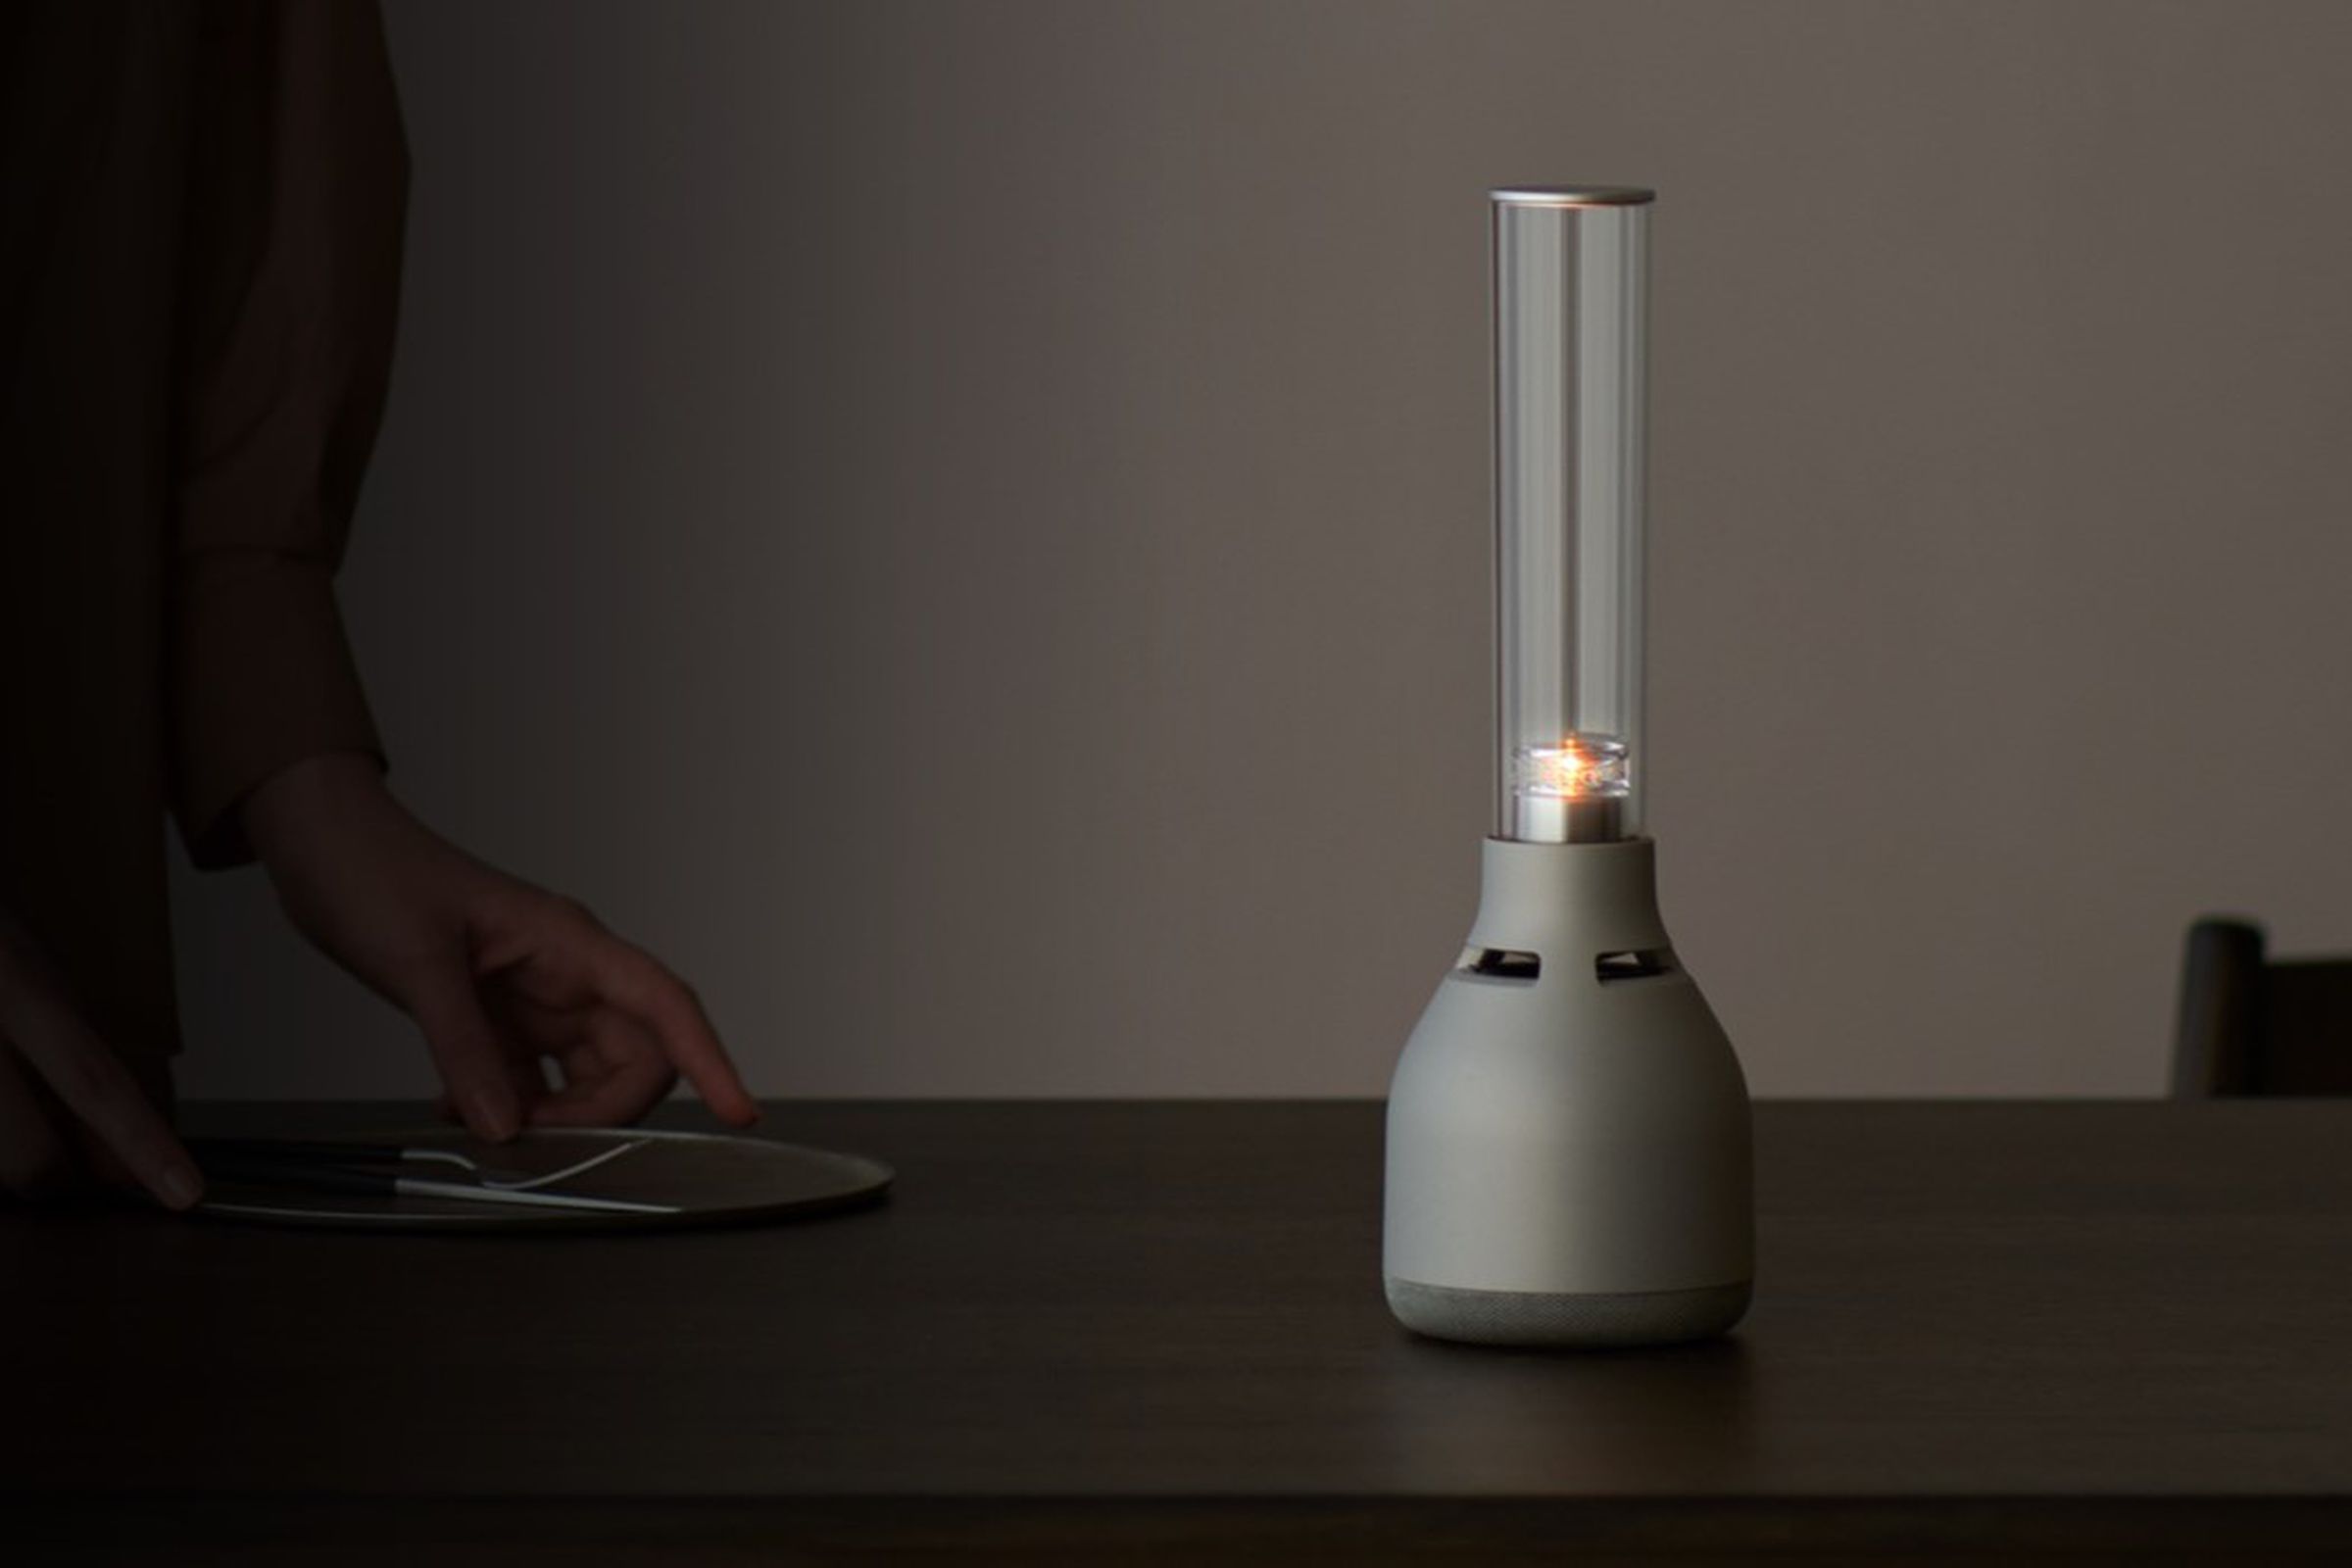 The speaker features a “candlelight mode.”